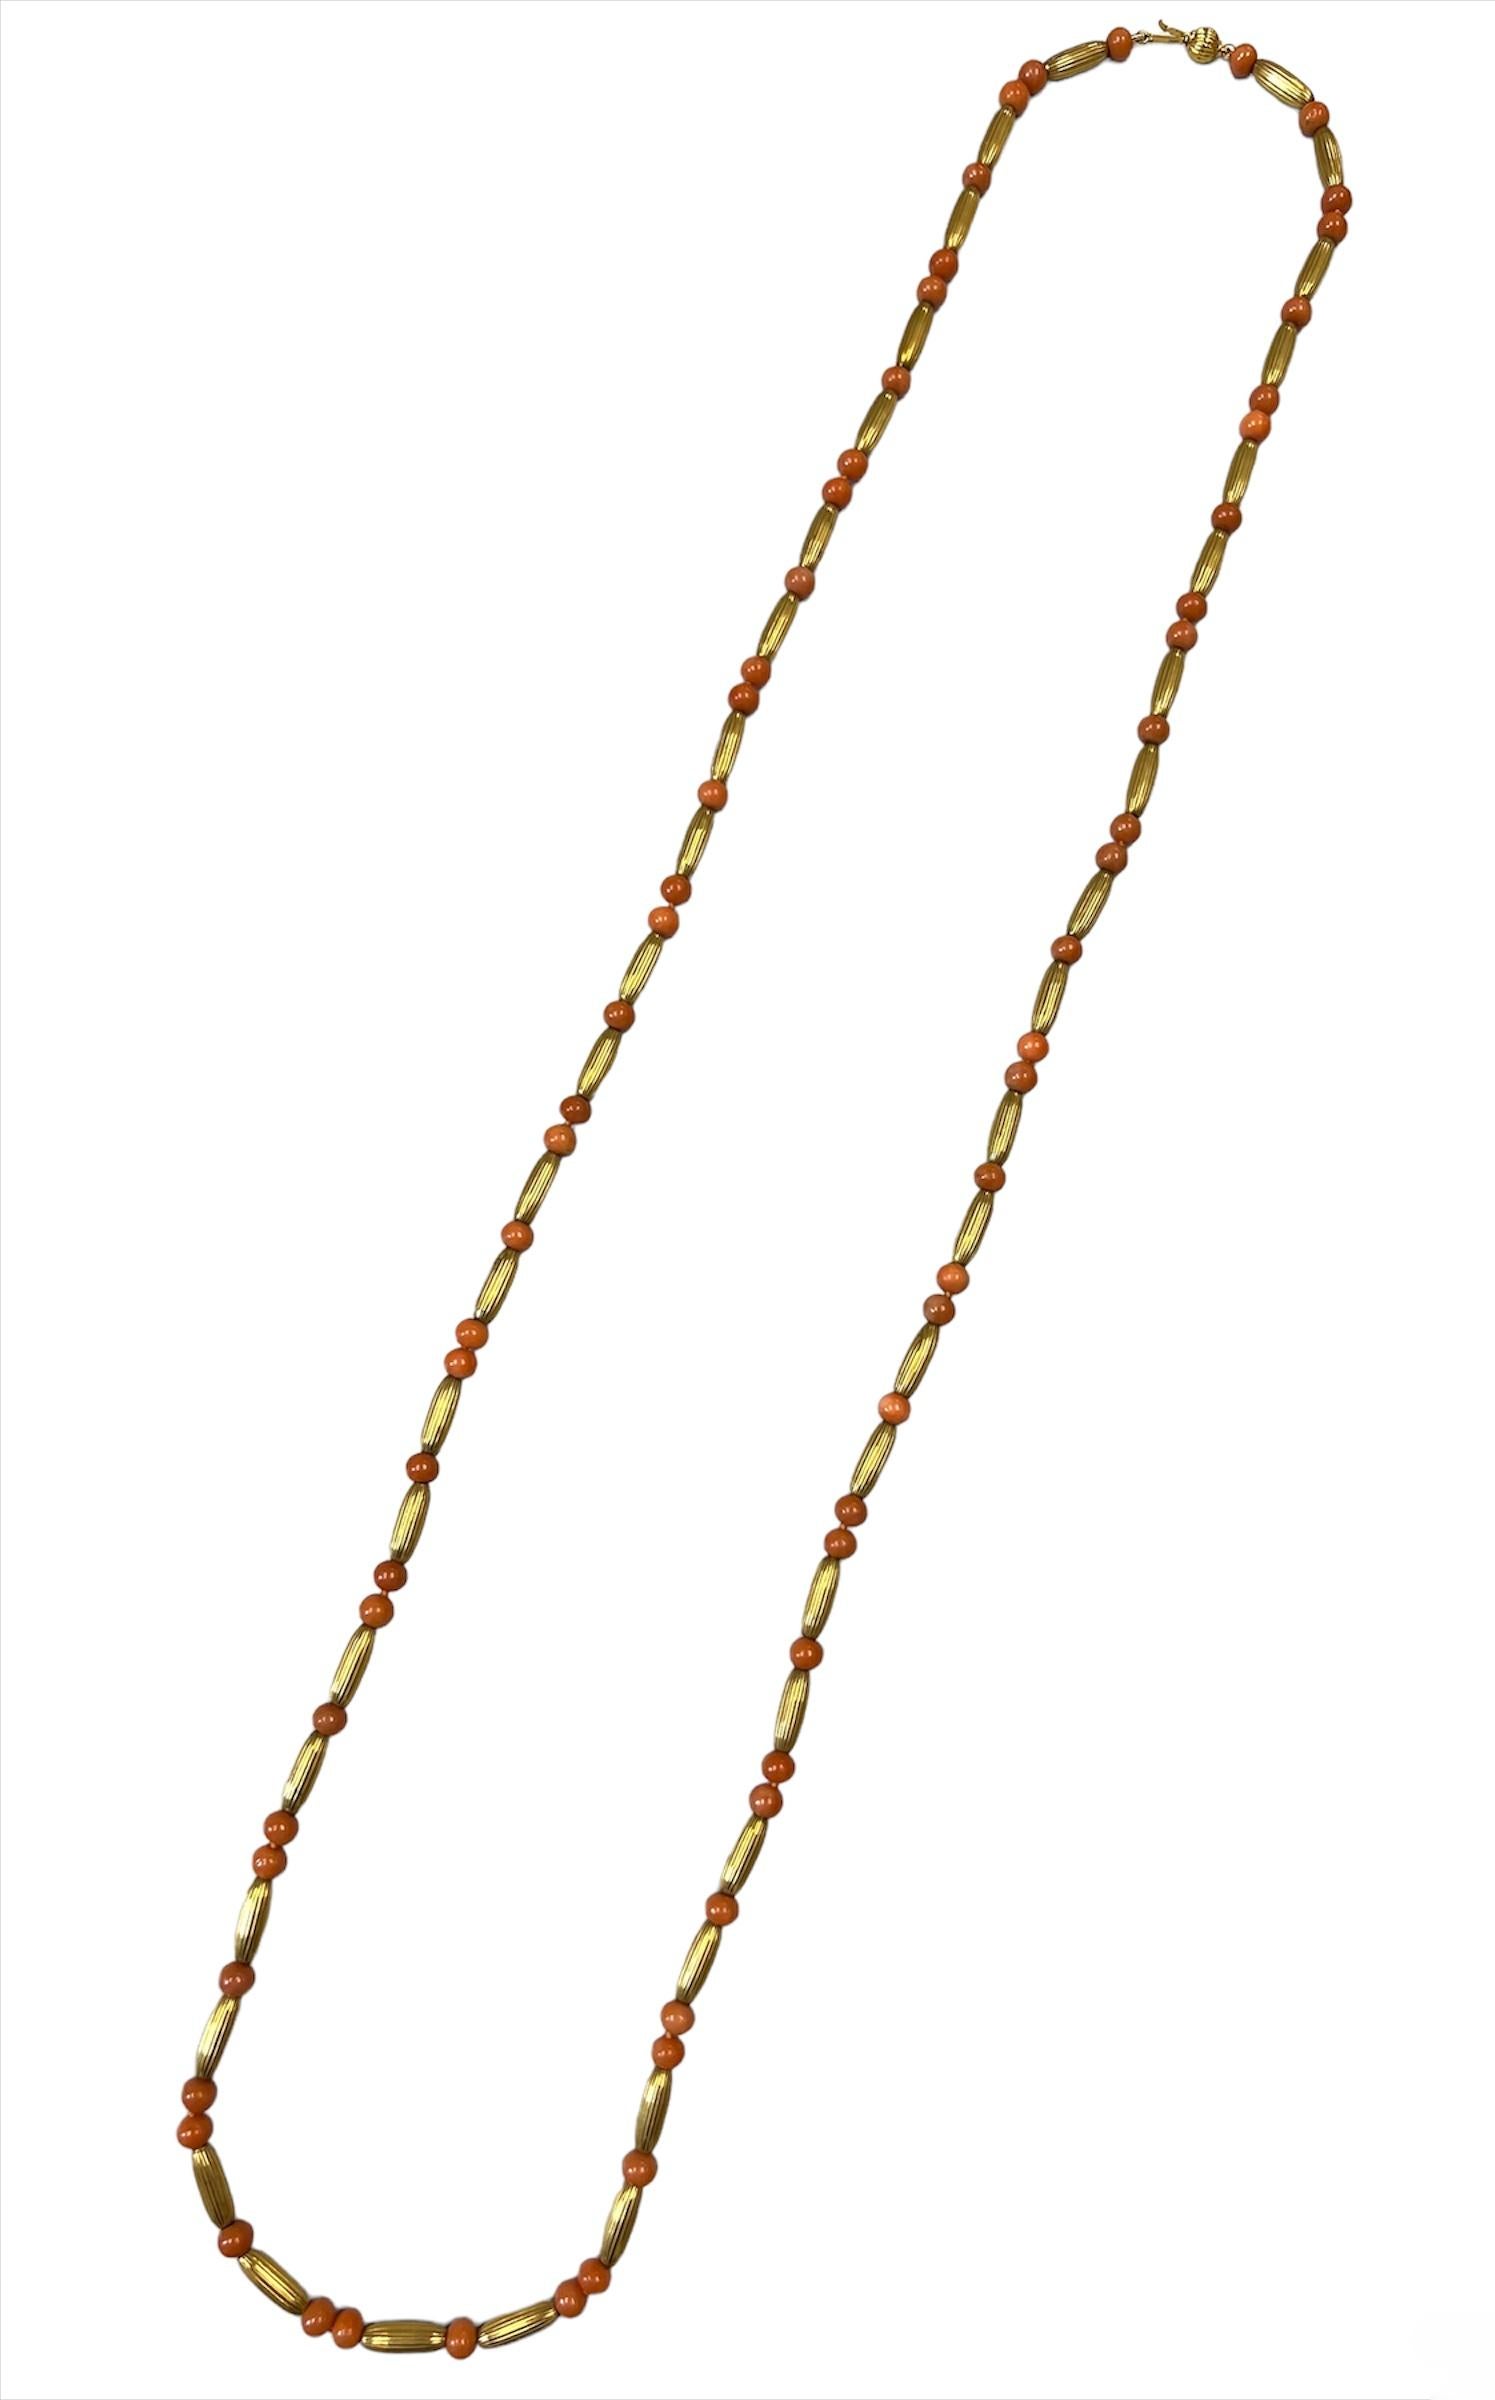 A fine coral necklace made in 14k gold, circa 1970s.

​The necklace features coral beads and textured hollow gold oval links.

The coral has a tender salmon pink color that matches well with the delicate gold hue.

This necklace has a perfect length